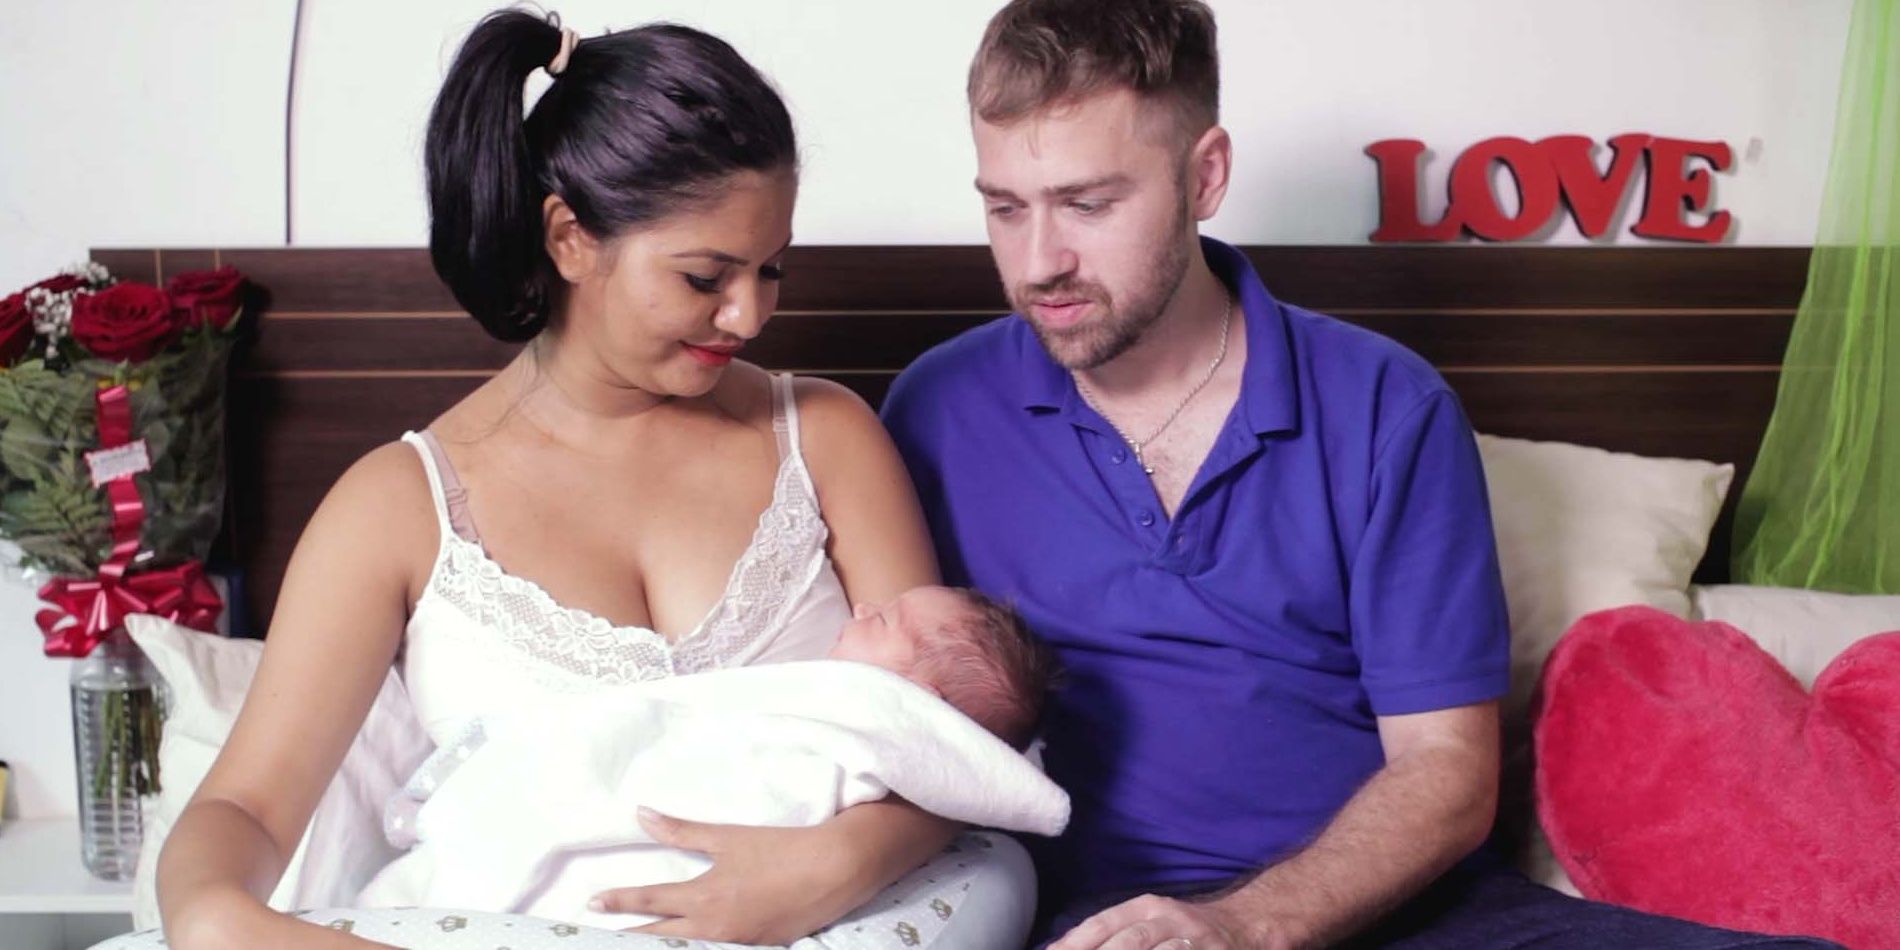 Paul Staehle and Karine Martins from 90 Day Fiance with their newborn son. Karine holds the baby as Paul looks on lovingly while seated on a bed